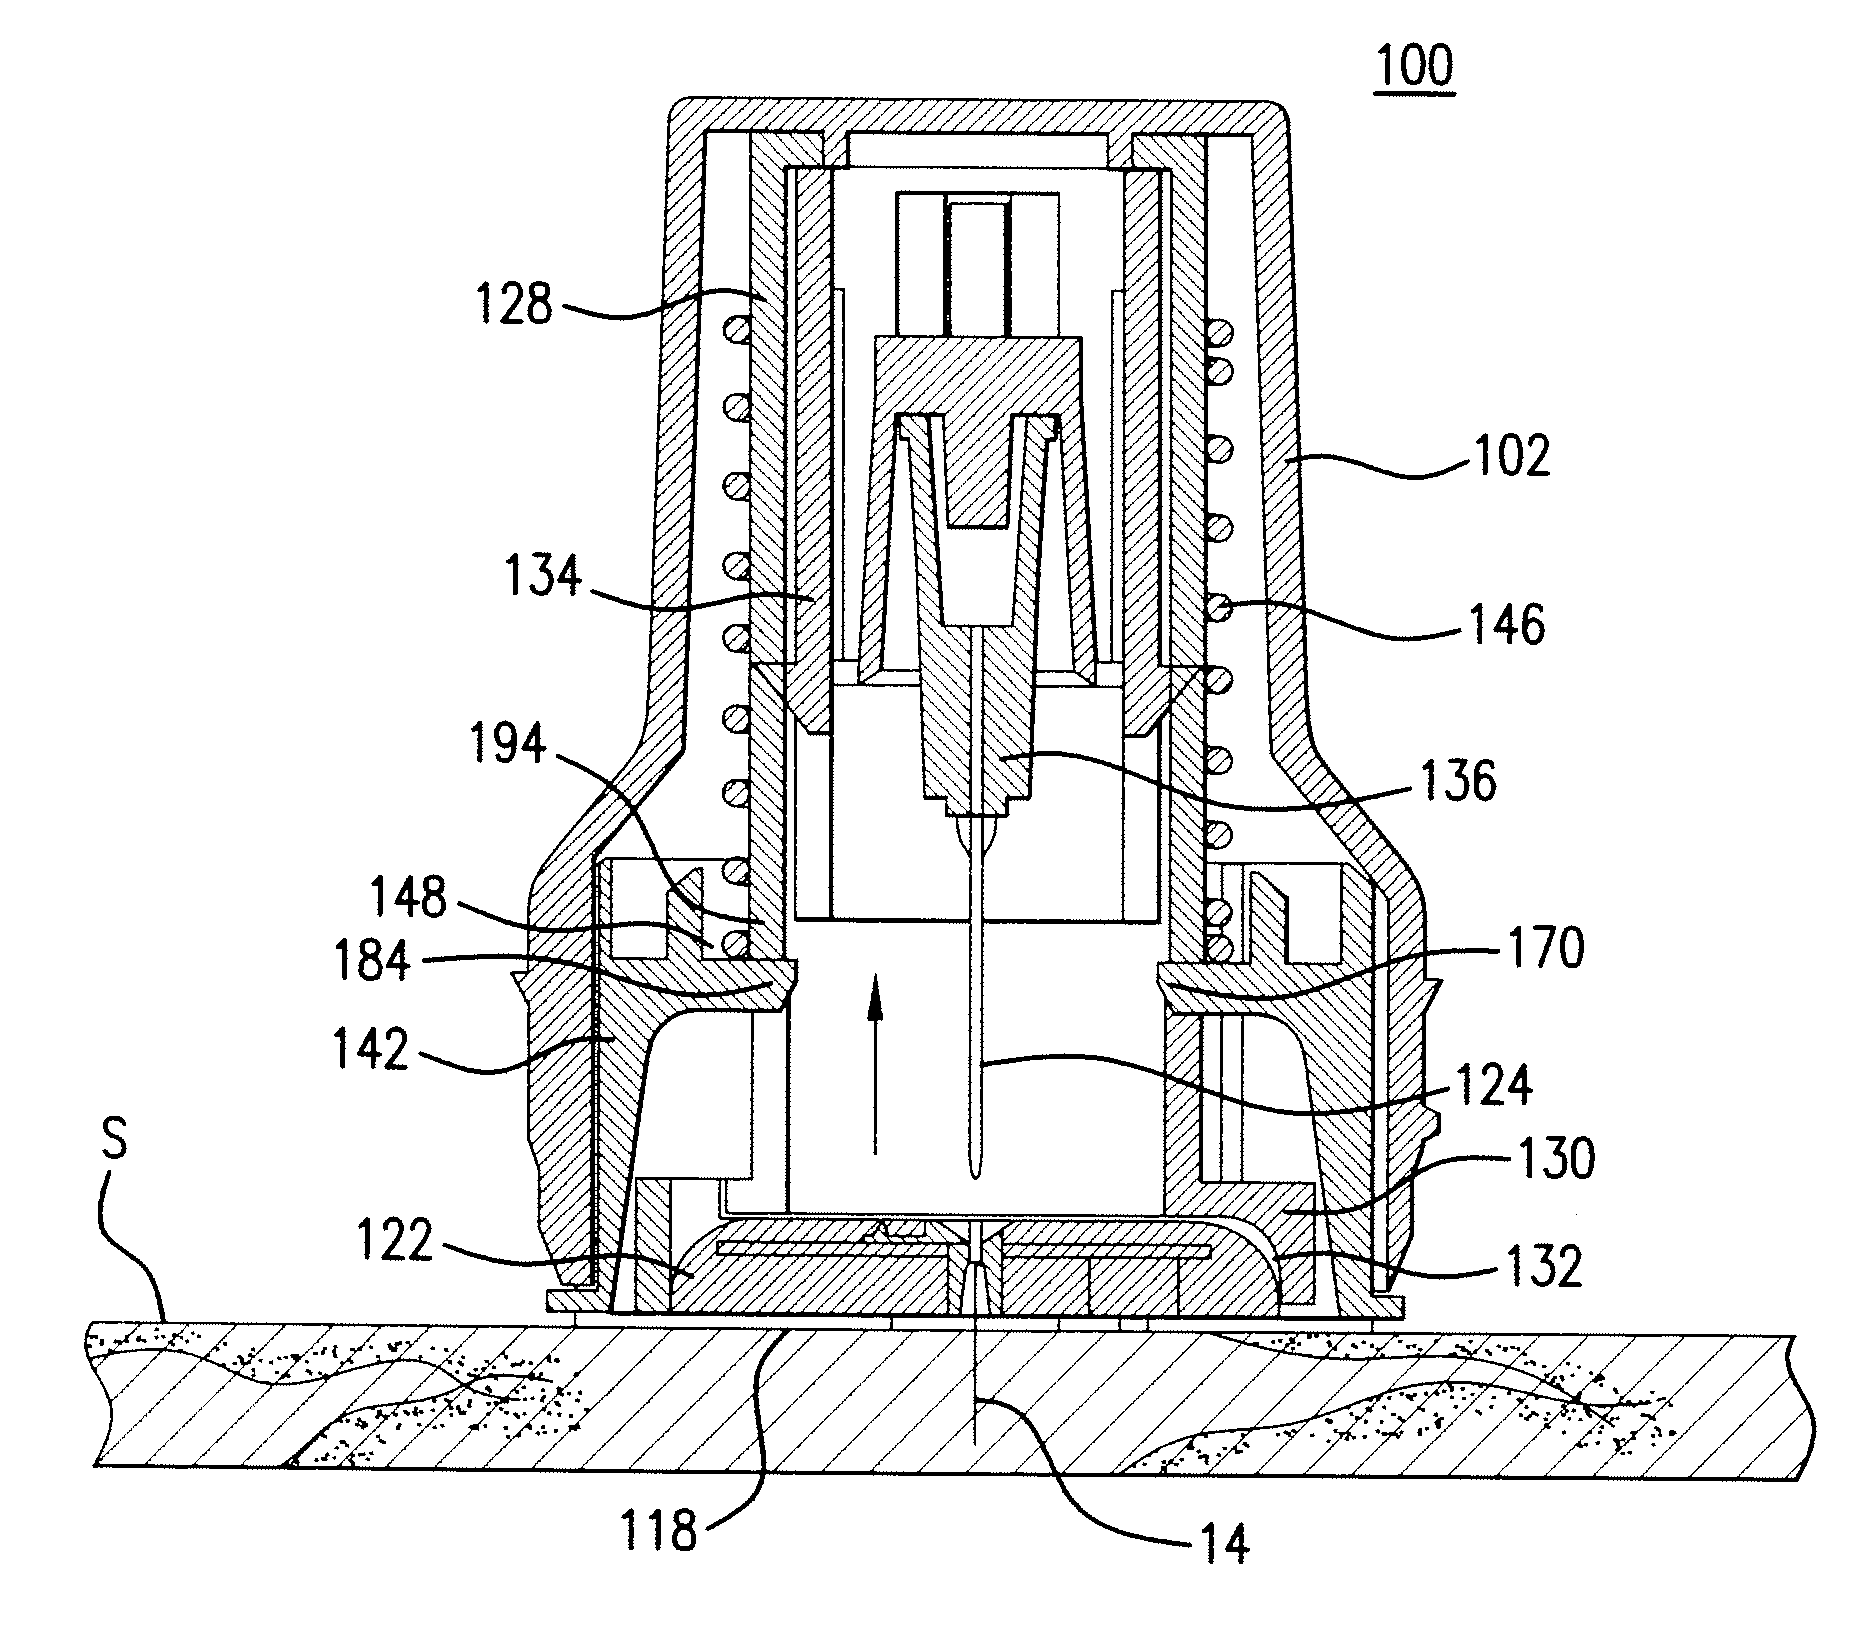 Analyte sensor and apparatus for insertion of the sensor